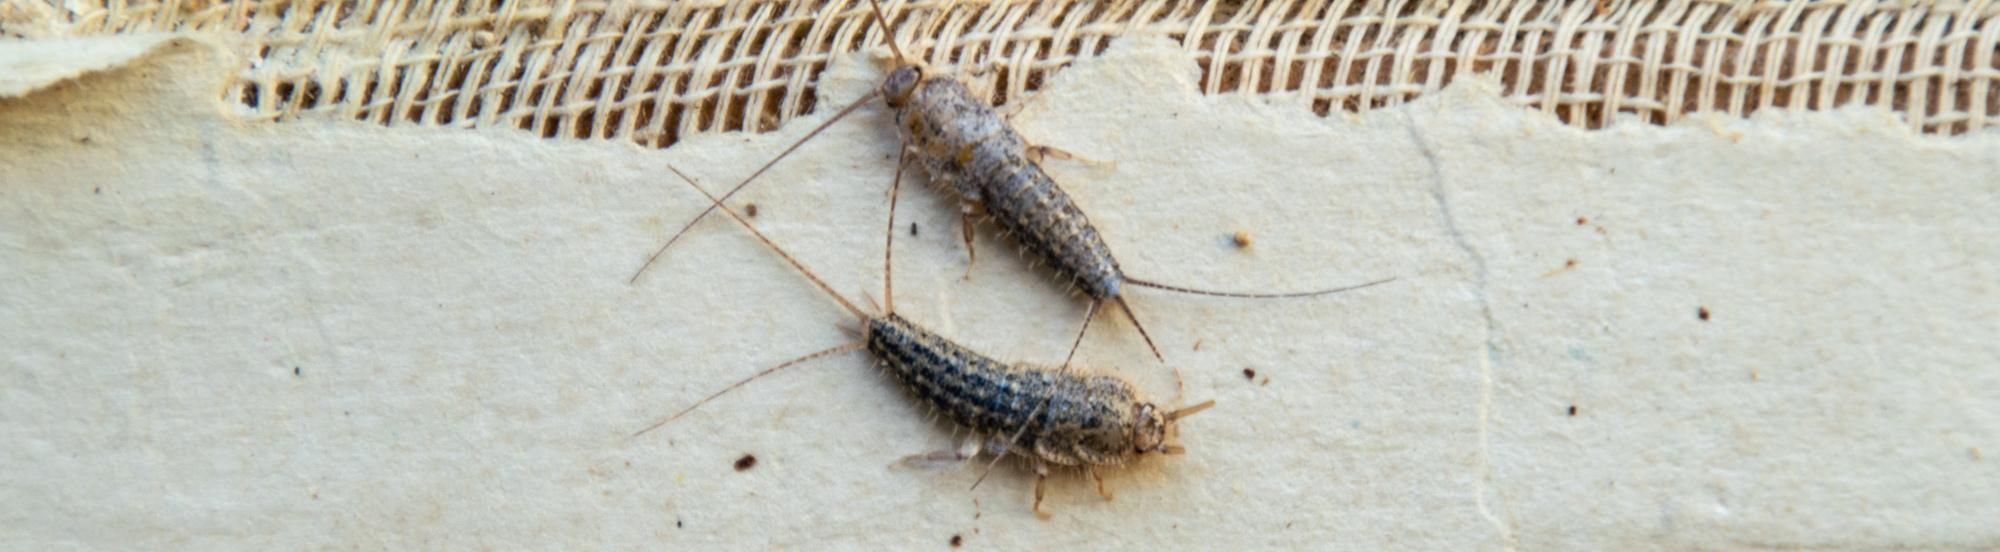 silverfish inside midwest home